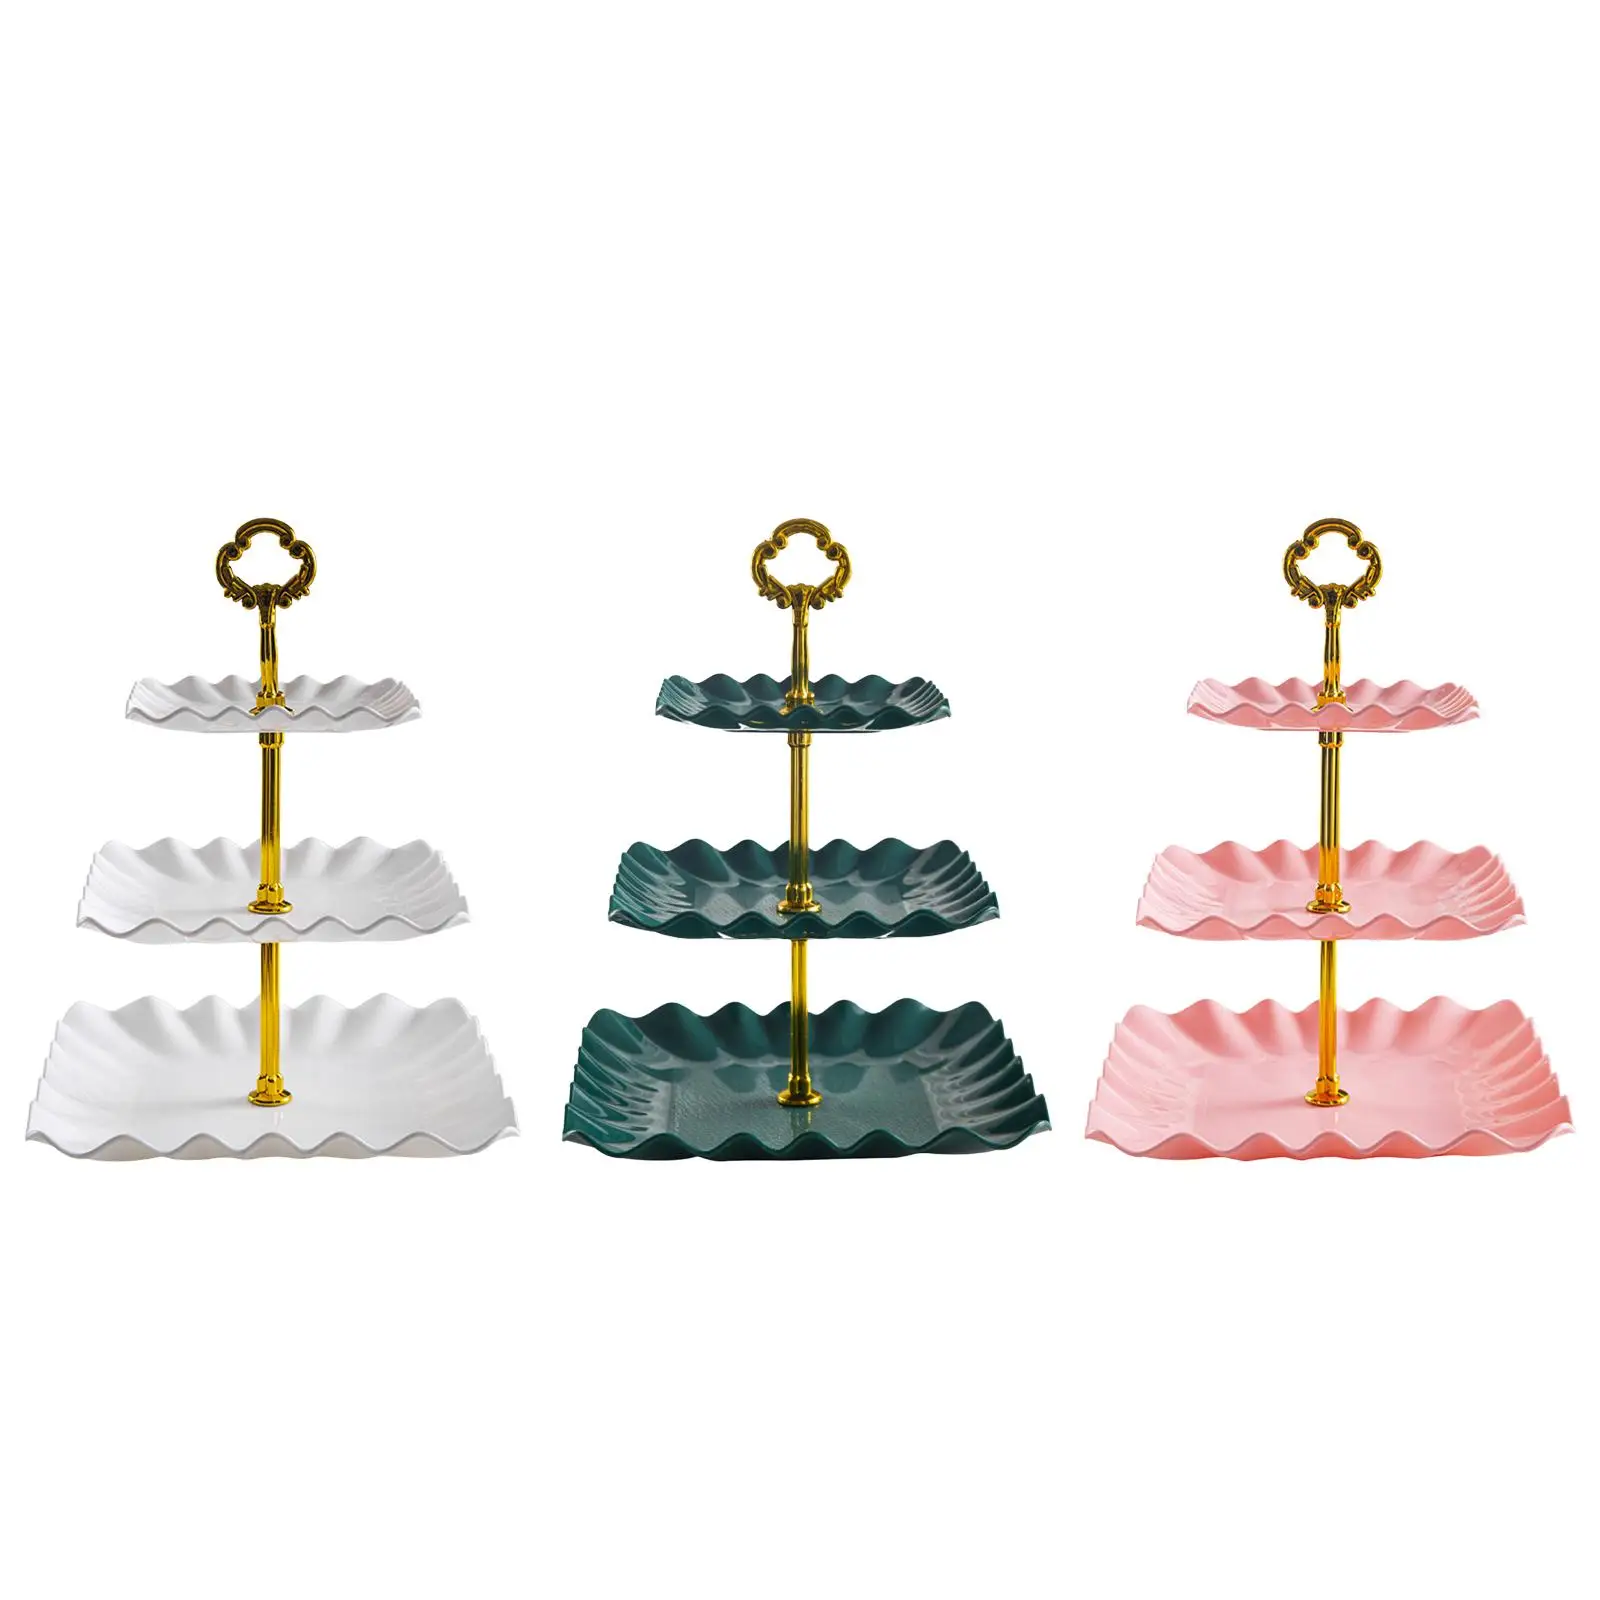 Cupcake Stand 3 Tier Display Plate with Handle Pastry Holder Fruits Snack Serving Tray for Wedding Parties Celebration Birthday